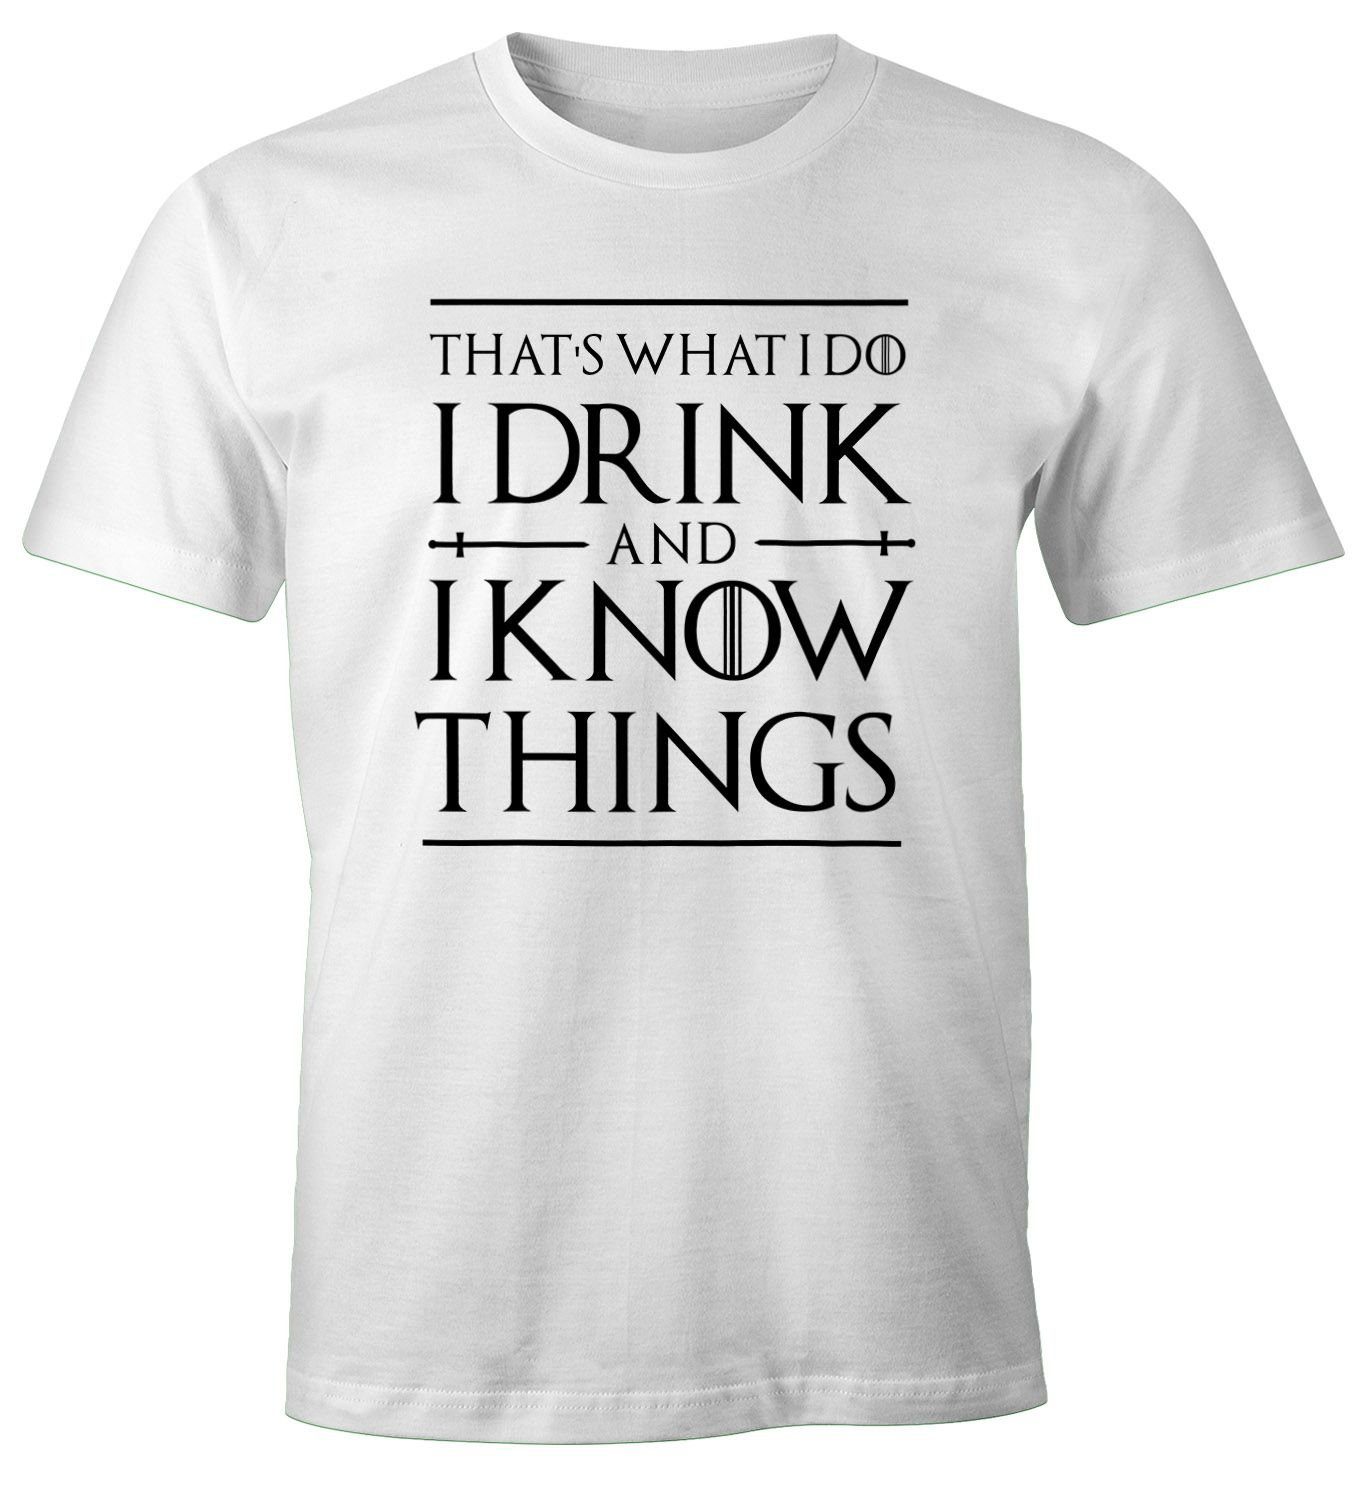 MoonWorks Print-Shirt Herren T-Shirt Spruch that's what i do I drink and i know things Moonworks® mit Print